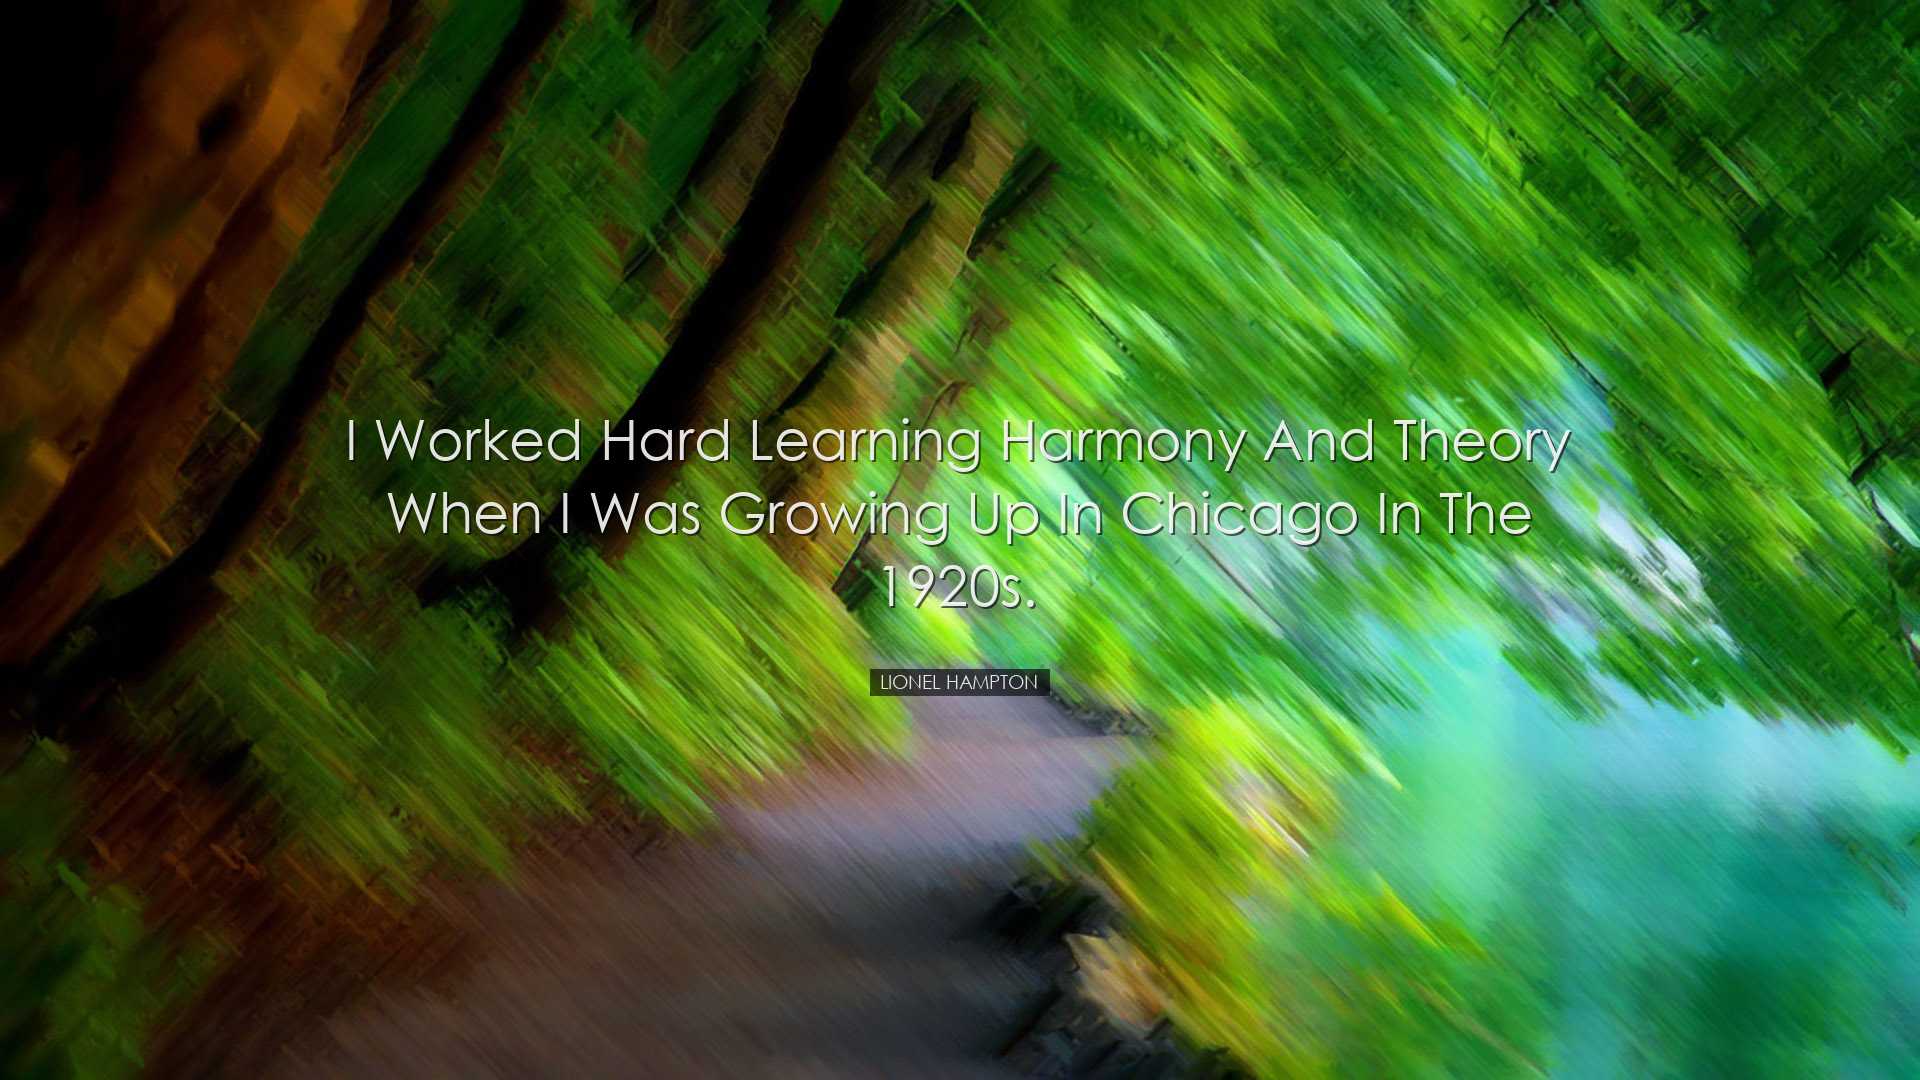 I worked hard learning harmony and theory when I was growing up in